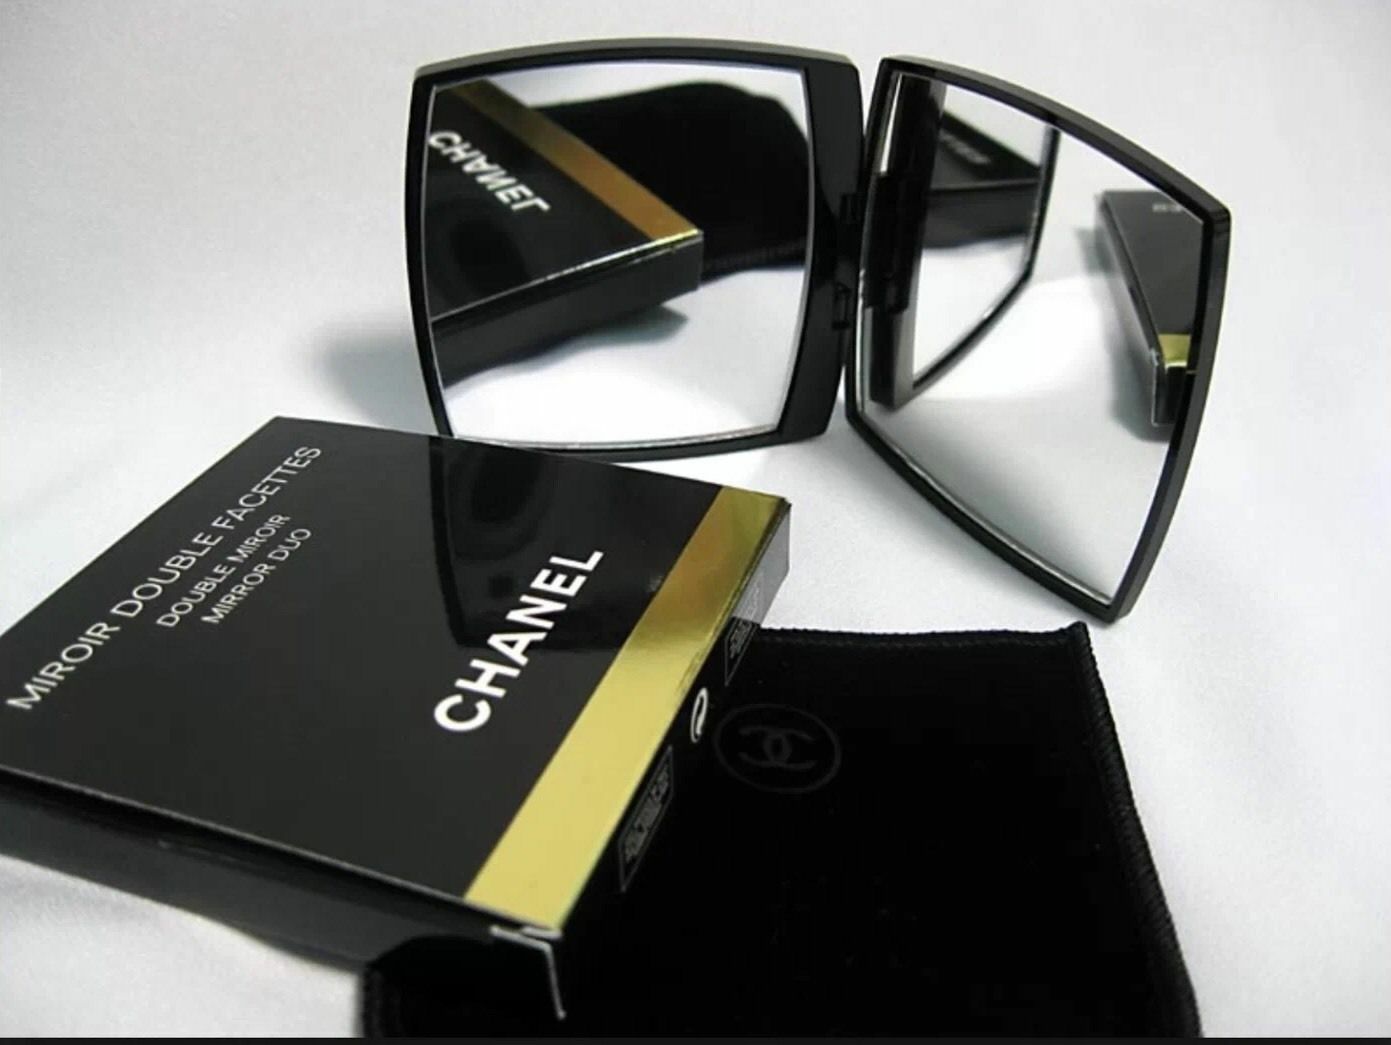 Chanel Compact Double Mirror Unboxing 